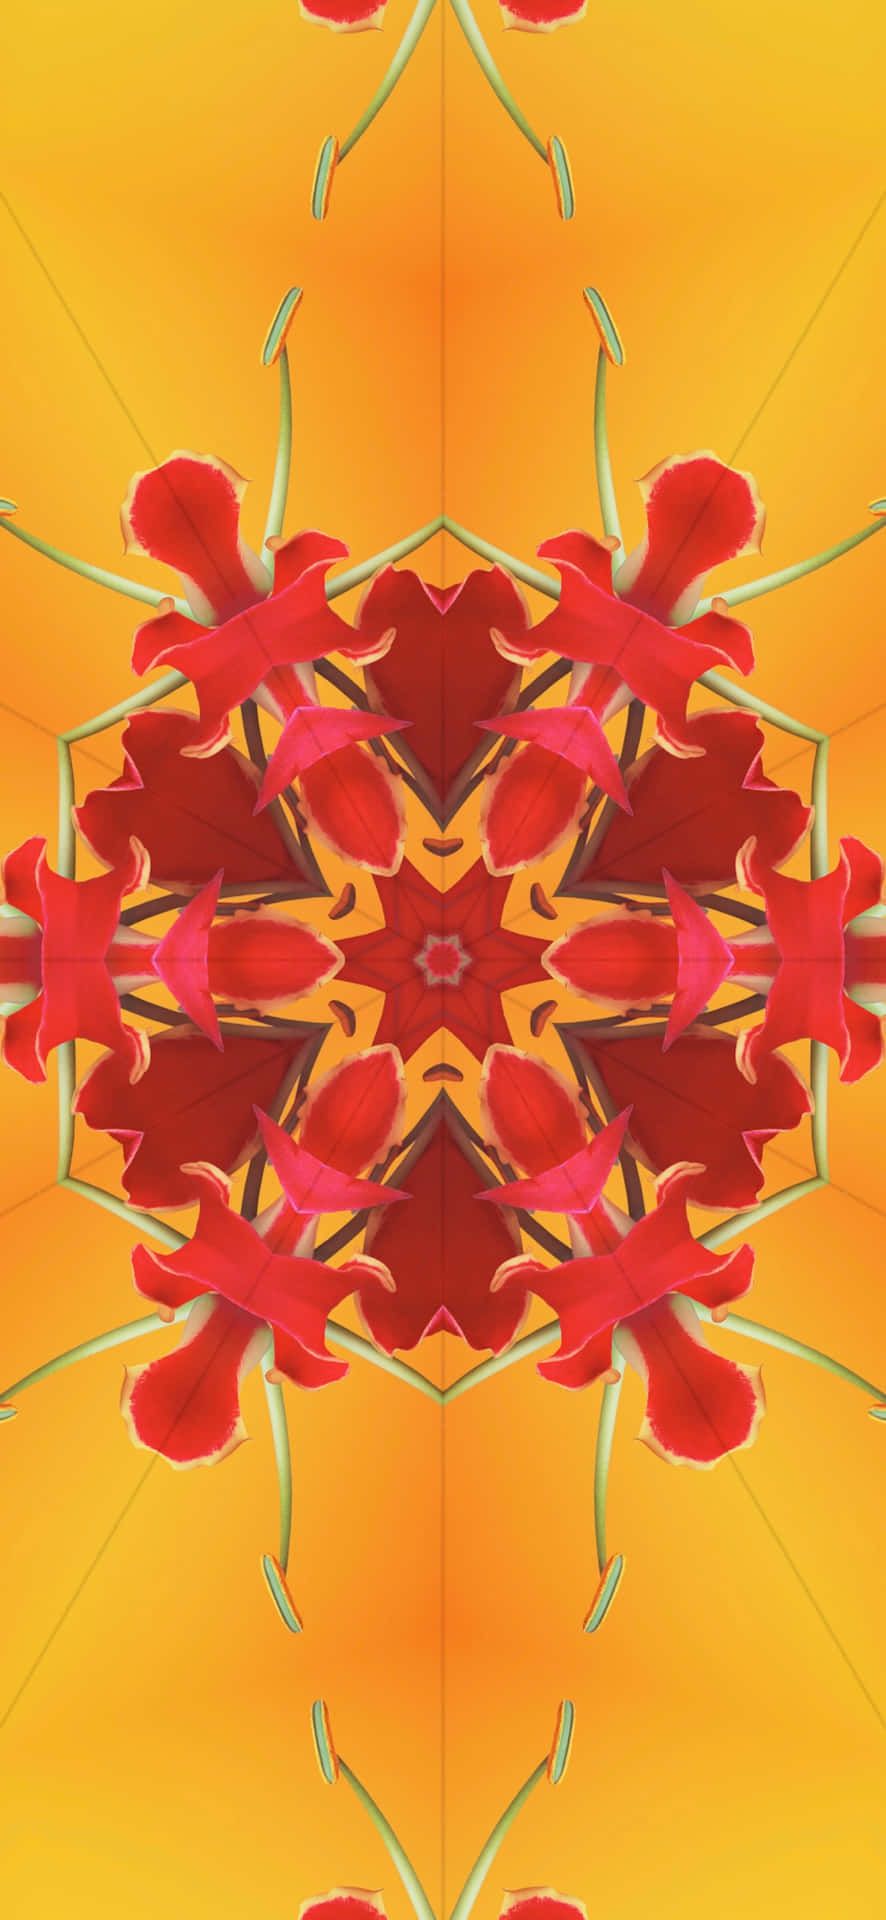 A red and yellow flower pattern - IOS 17